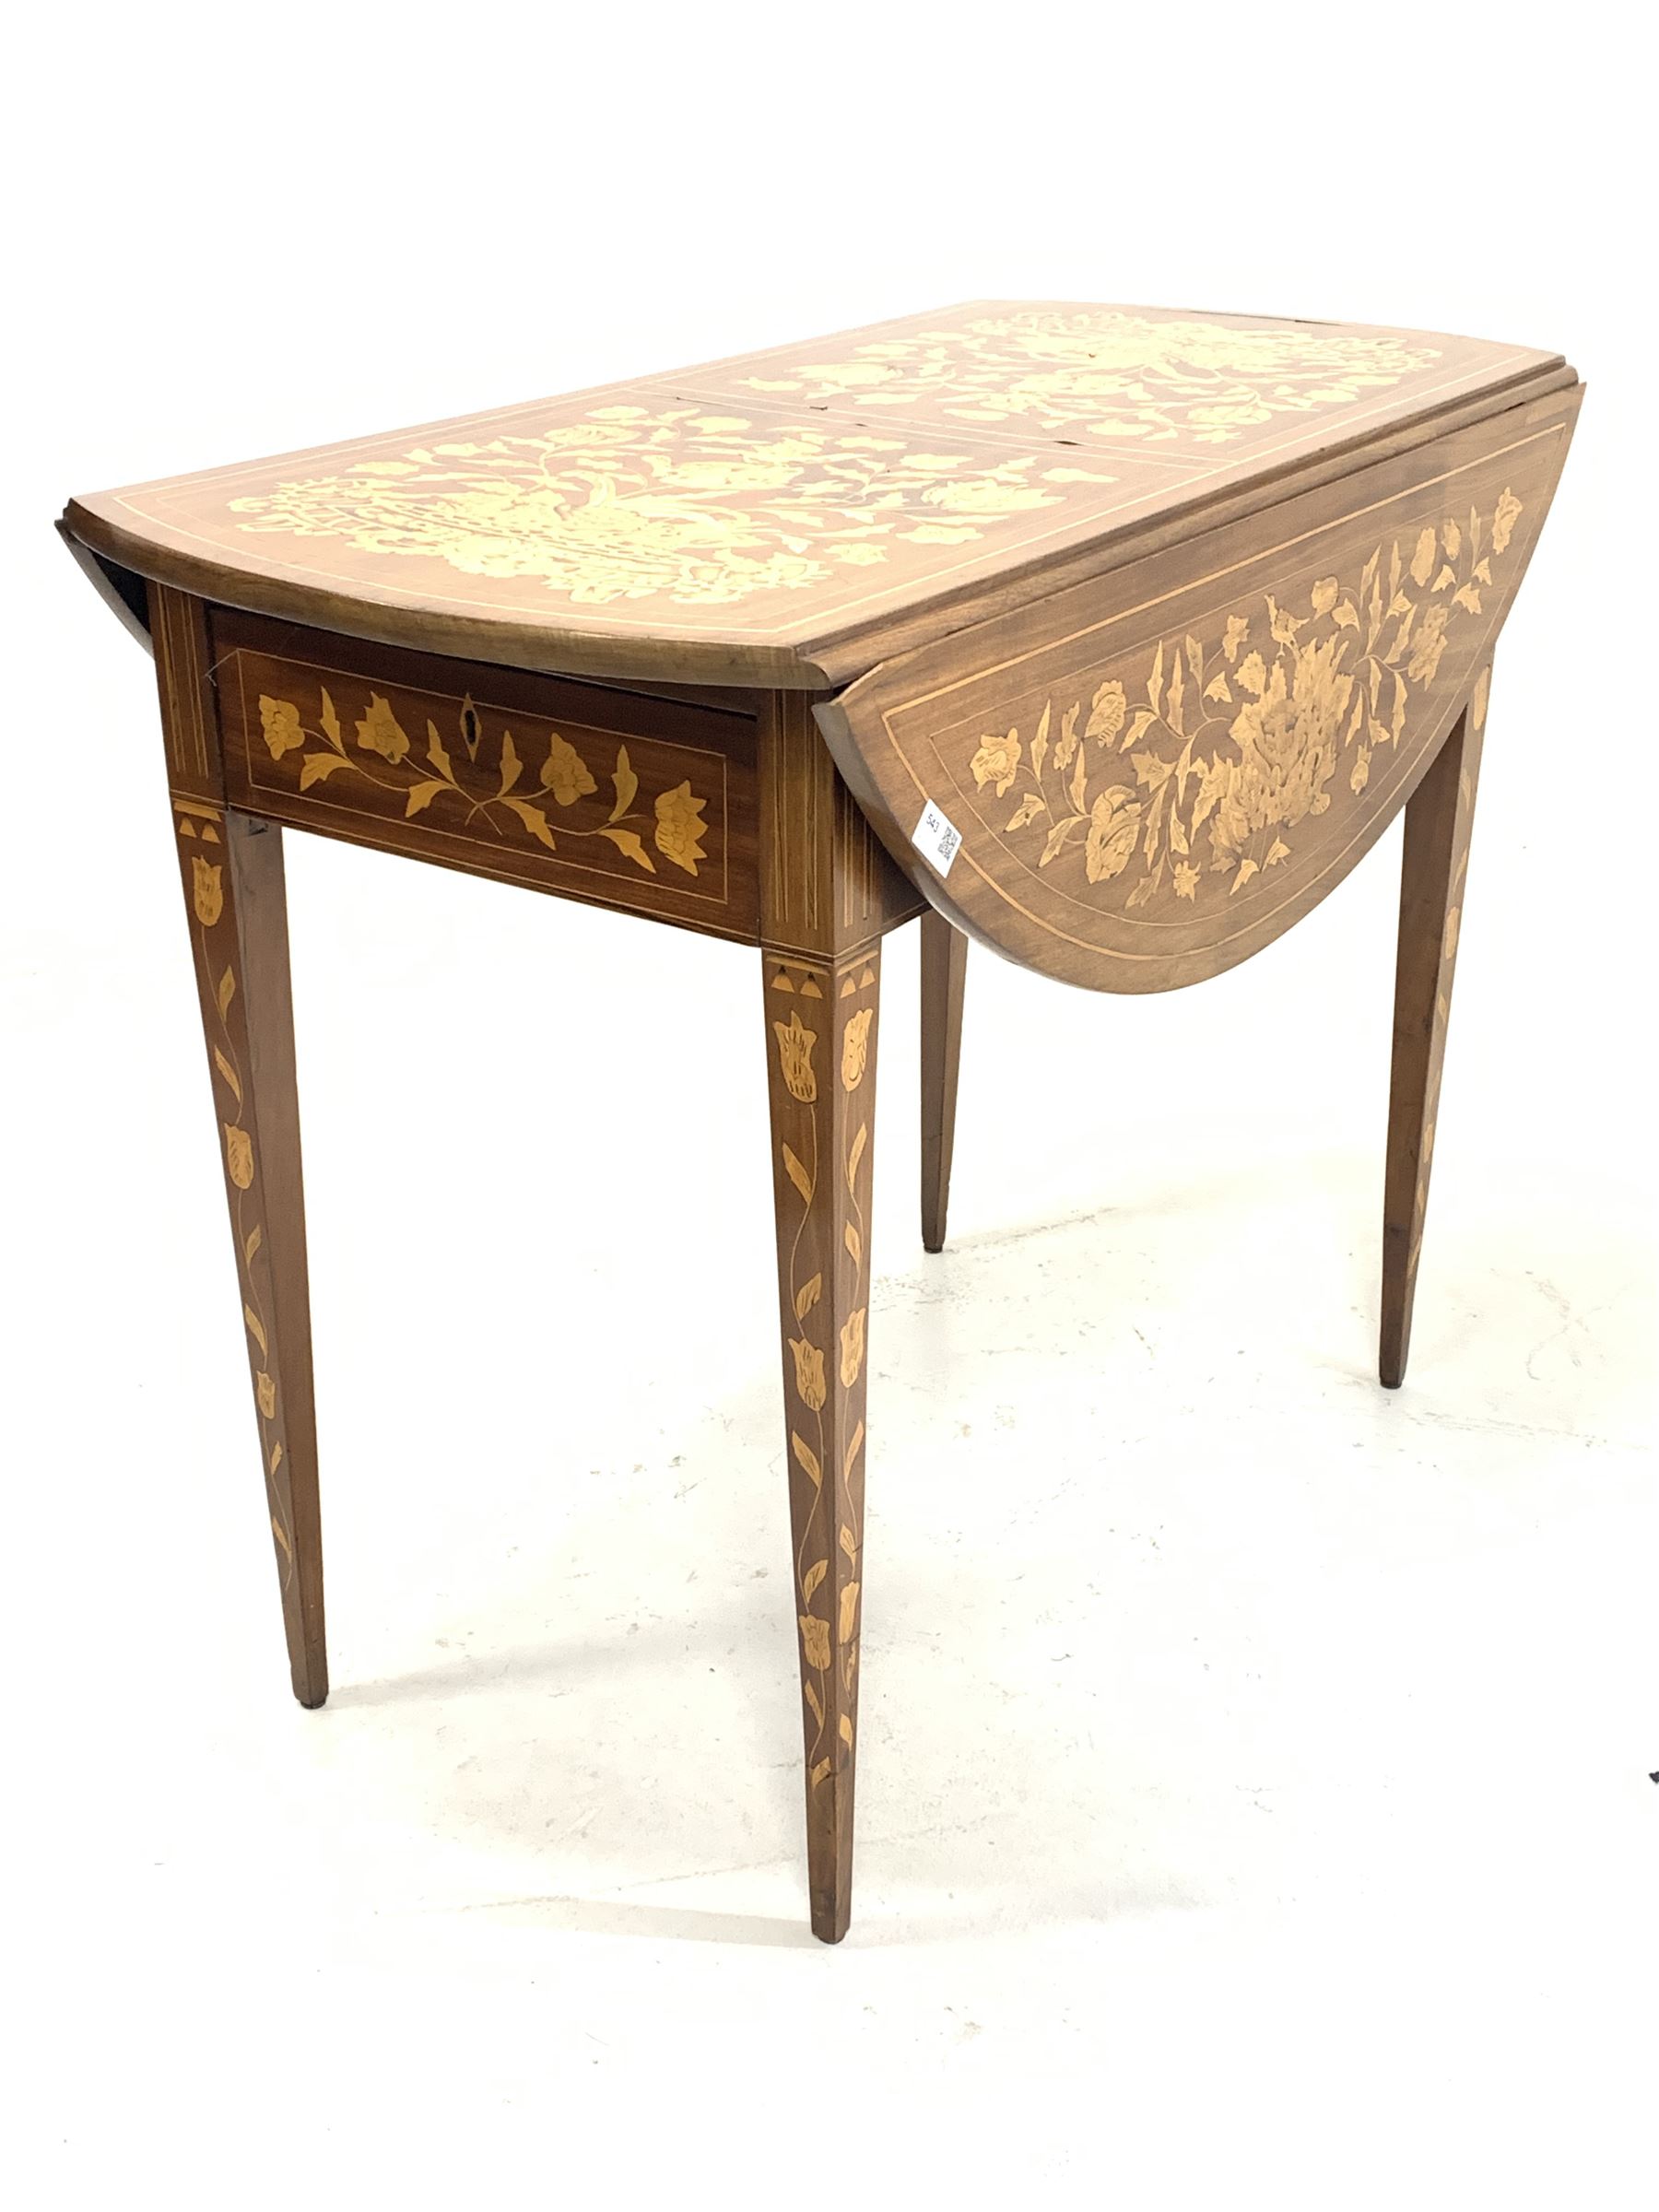 Dutch marquetry Pembroke table inlaid with stylised flowers - Image 3 of 7